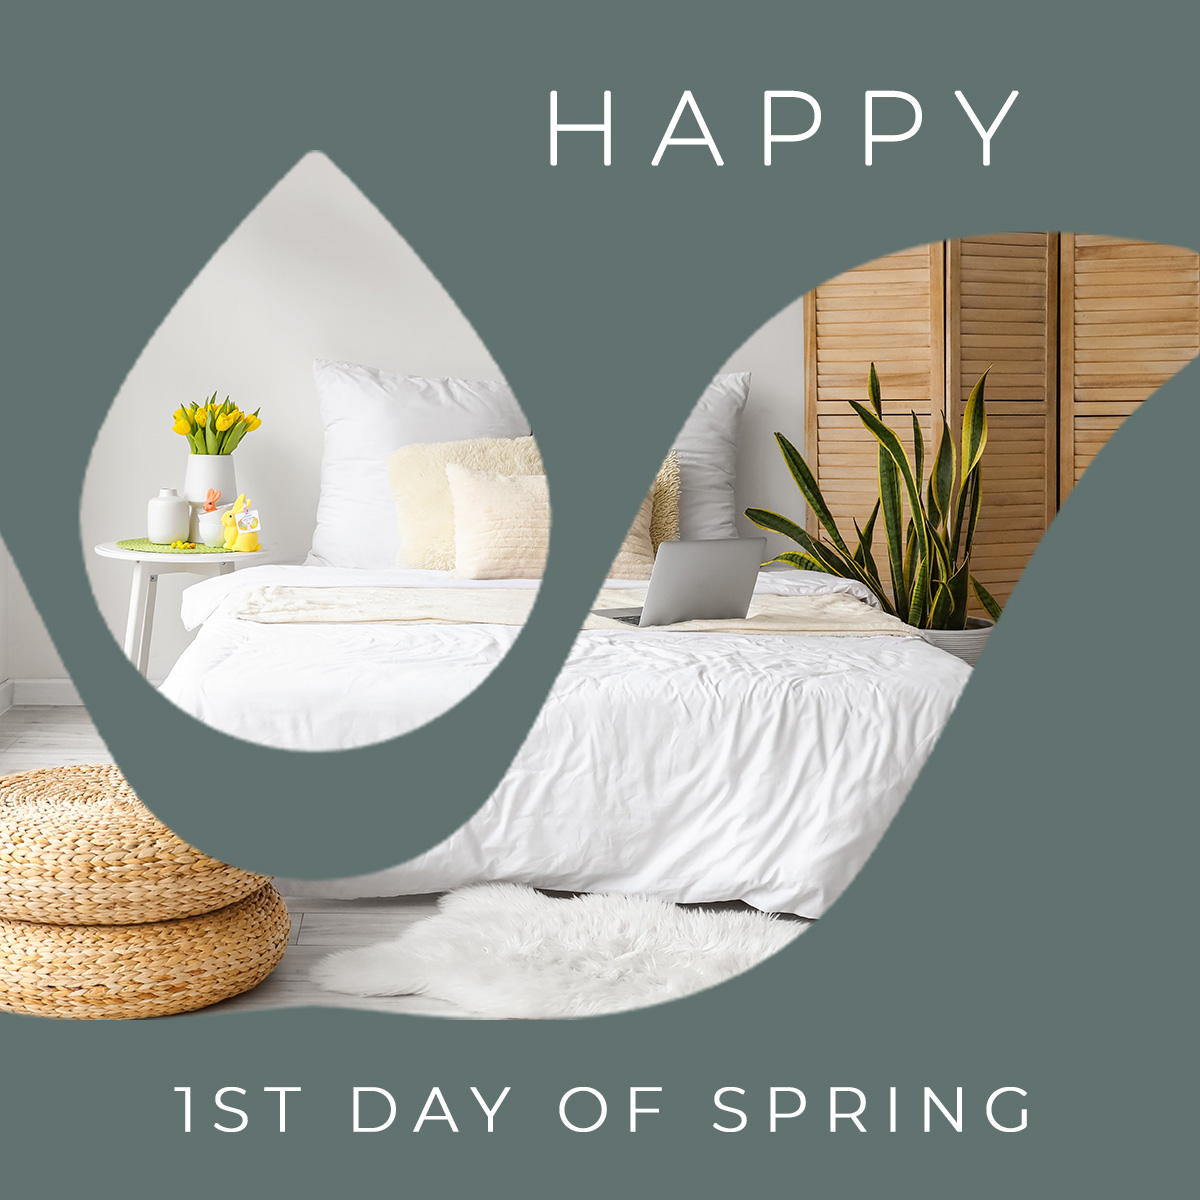 Blossoms bloom, and spirits rise. Happy 1st Day of Spring! 🌸🌱 #spring #sleep #home #organic